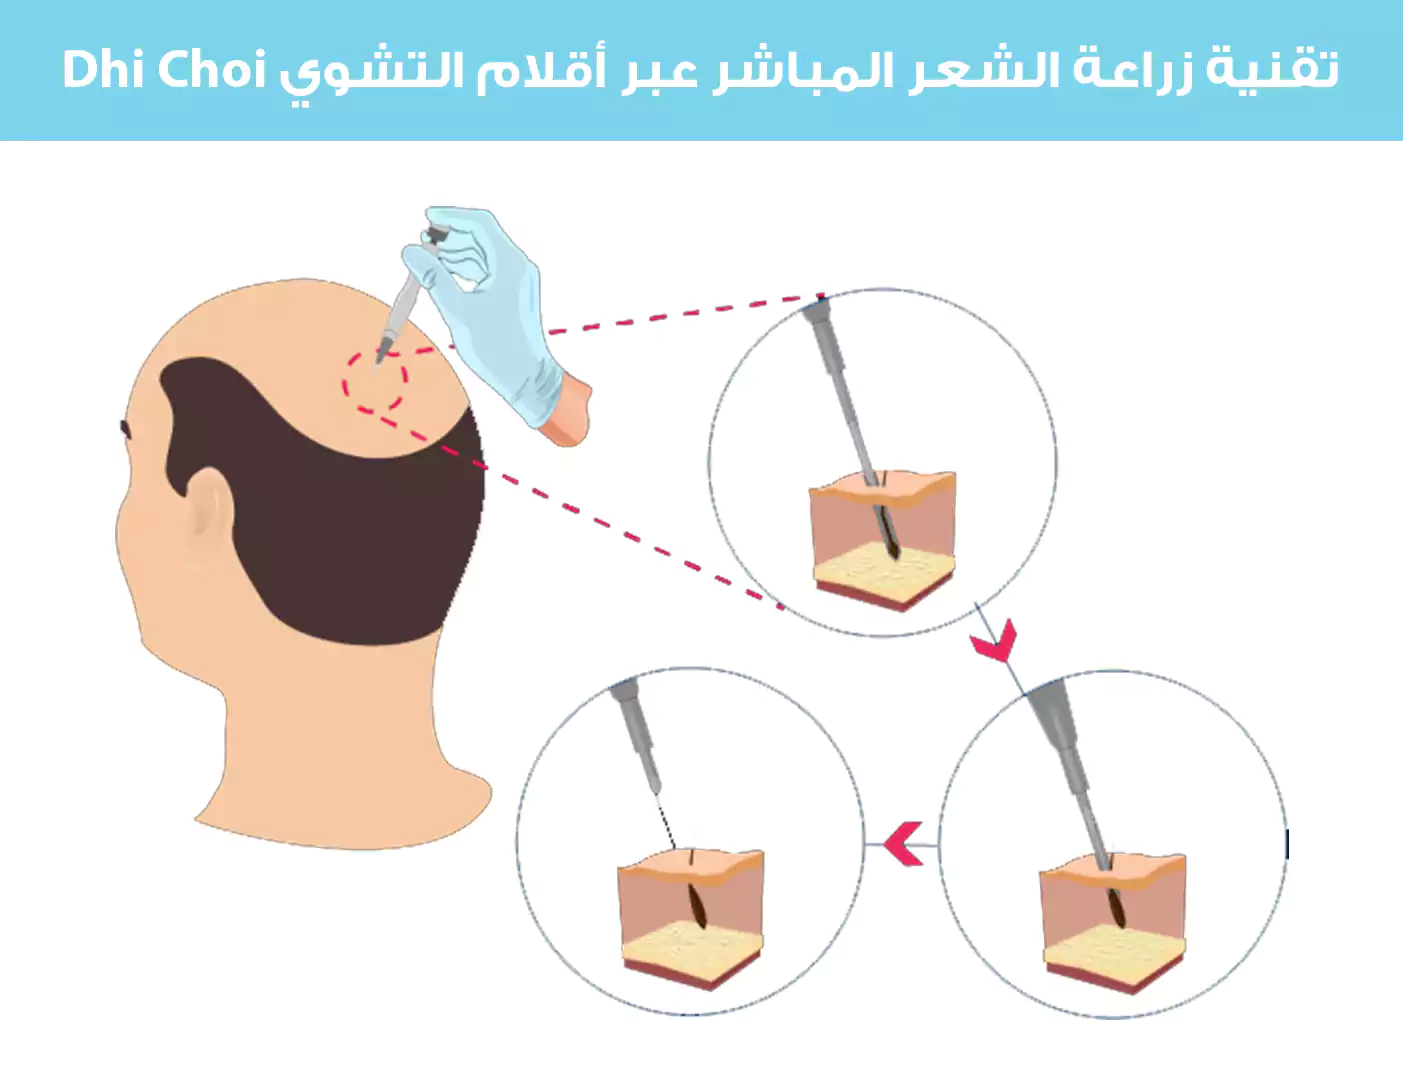 An image showing the technique of direct hair transplantation using Dhi Choi pens